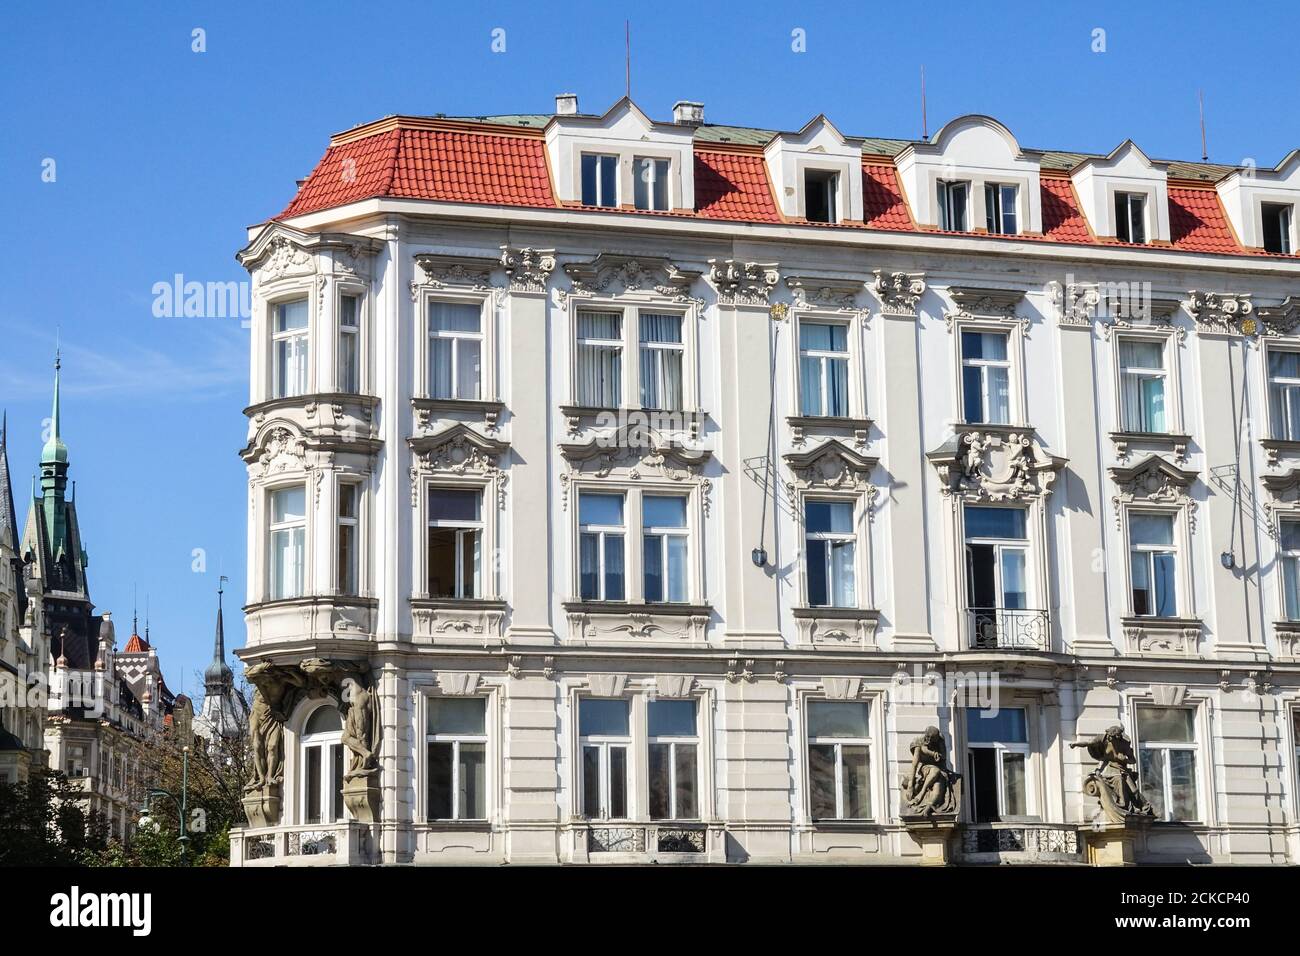 The Oppelt-House Old Town Square Prague, Franz Kafka lived in the uppermost floor from 1913 Luxury Prague apartments Stock Photo